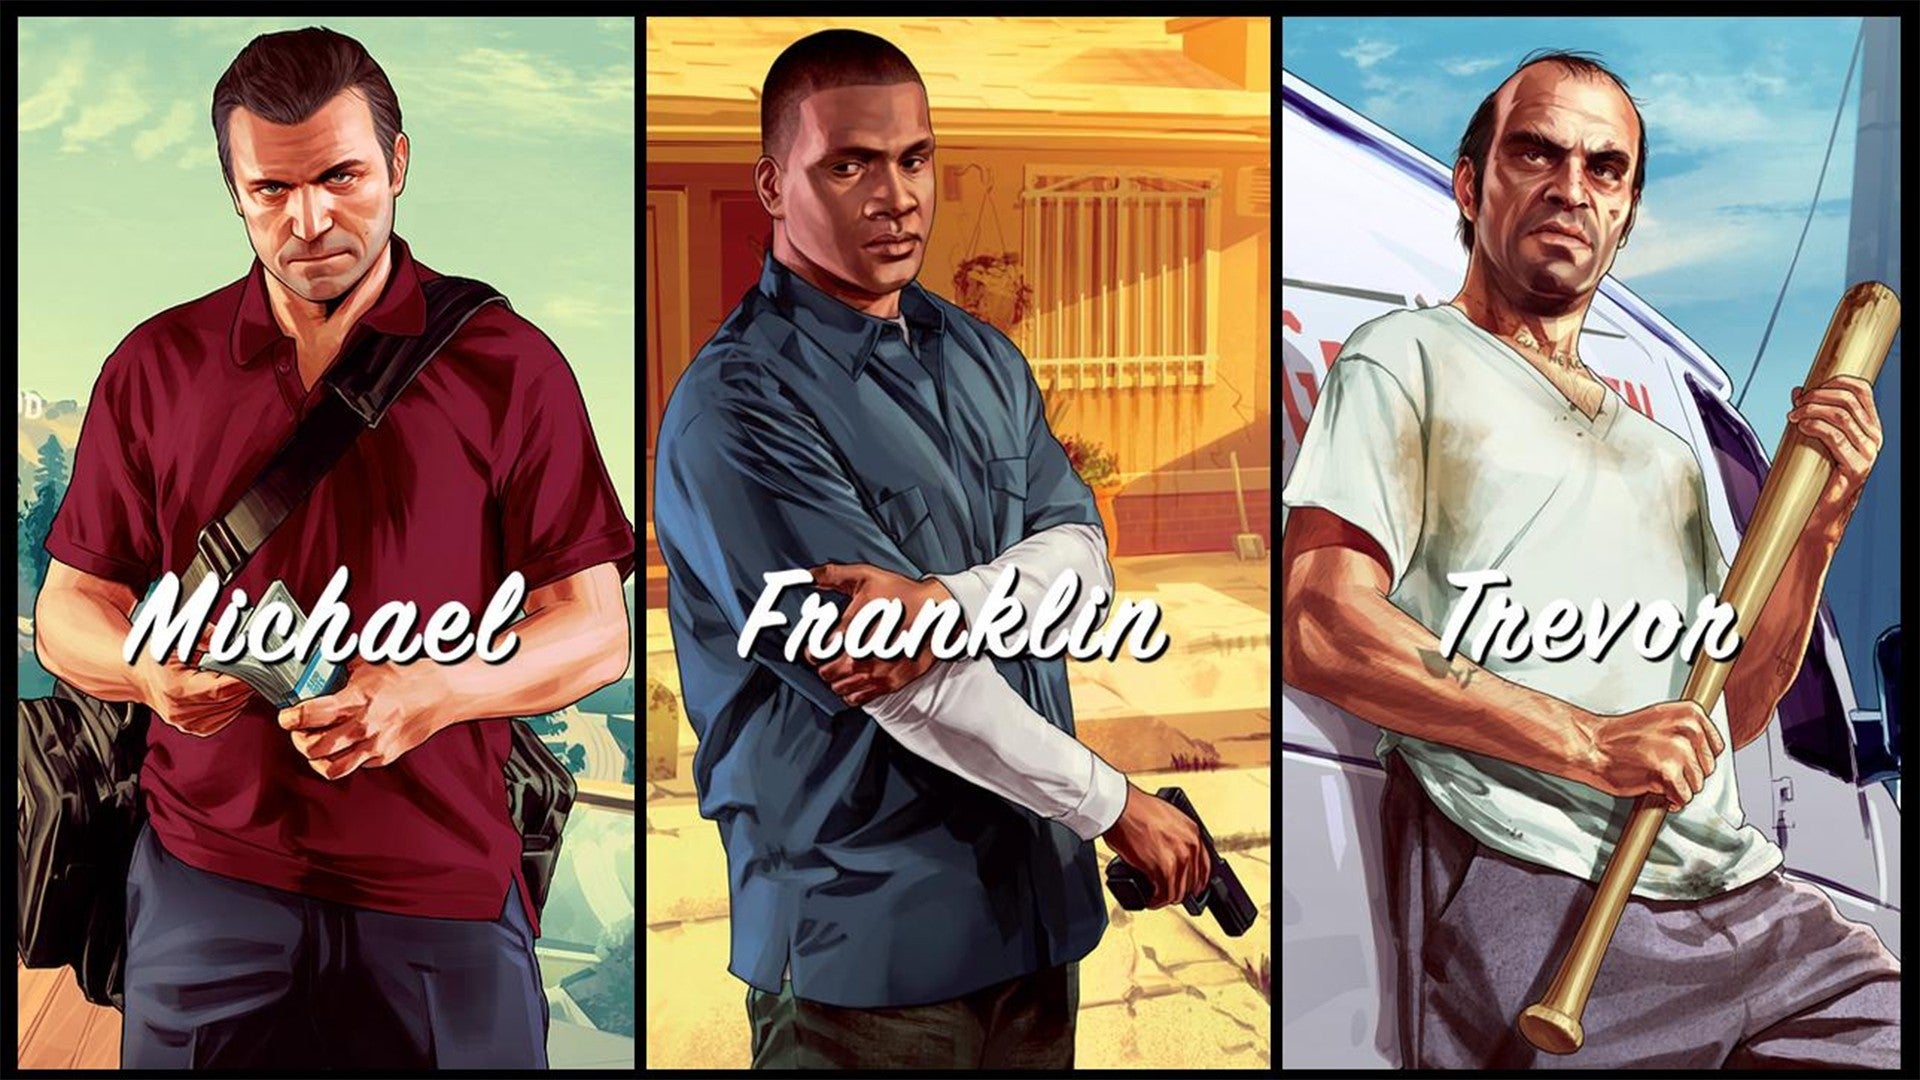 Gta 5 First Gameplay Trailer Released By Rockstar